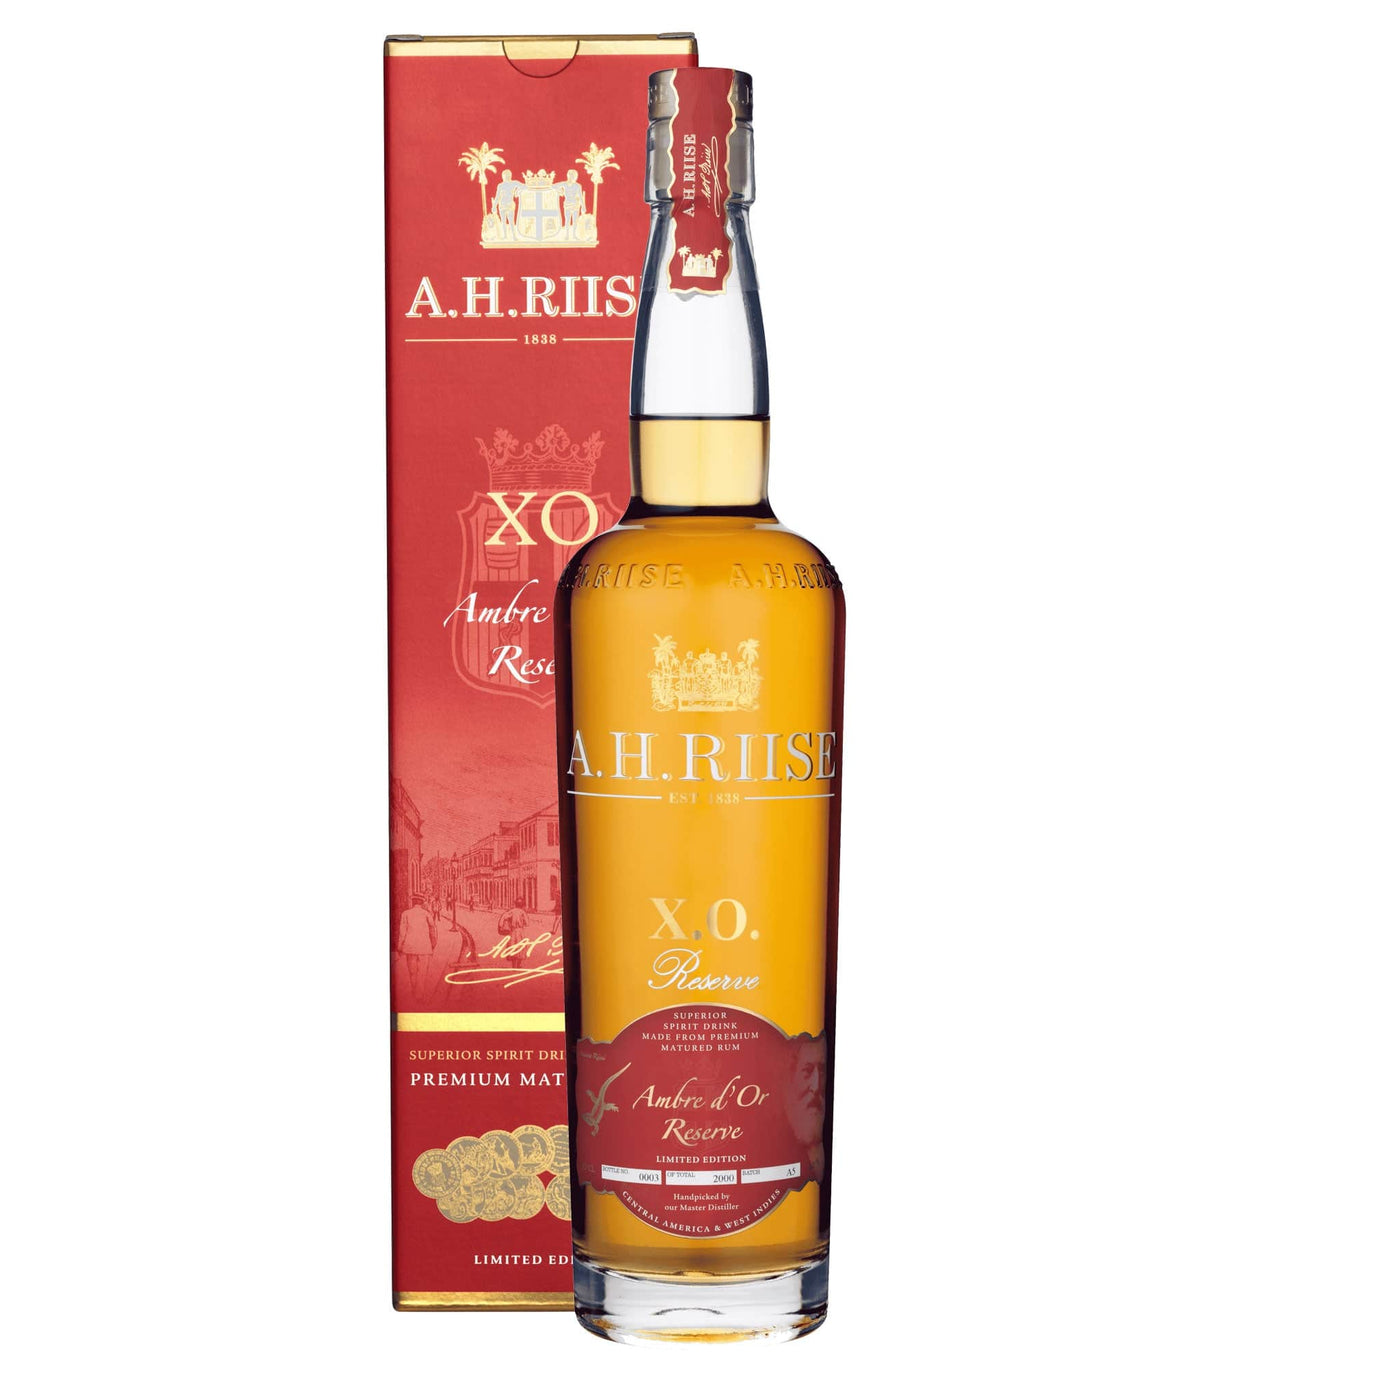 A.H. Riise XO Ambre d'Or Reserve Rum - Spiritly